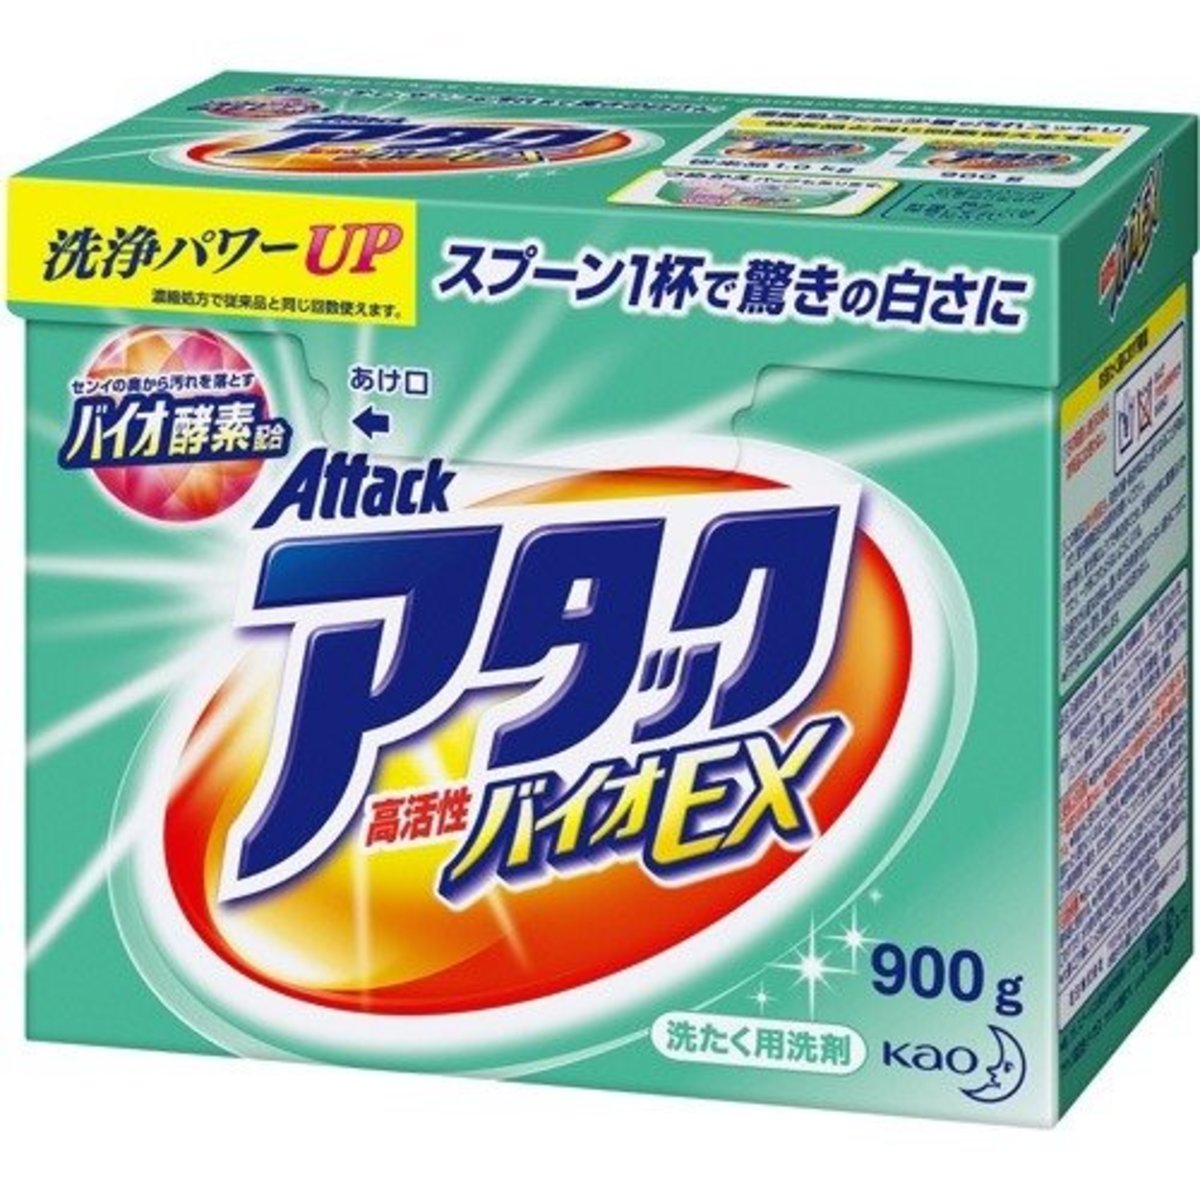 Attack Neo Highly Active Bio Washing Powder EX 900g [Parallel import]